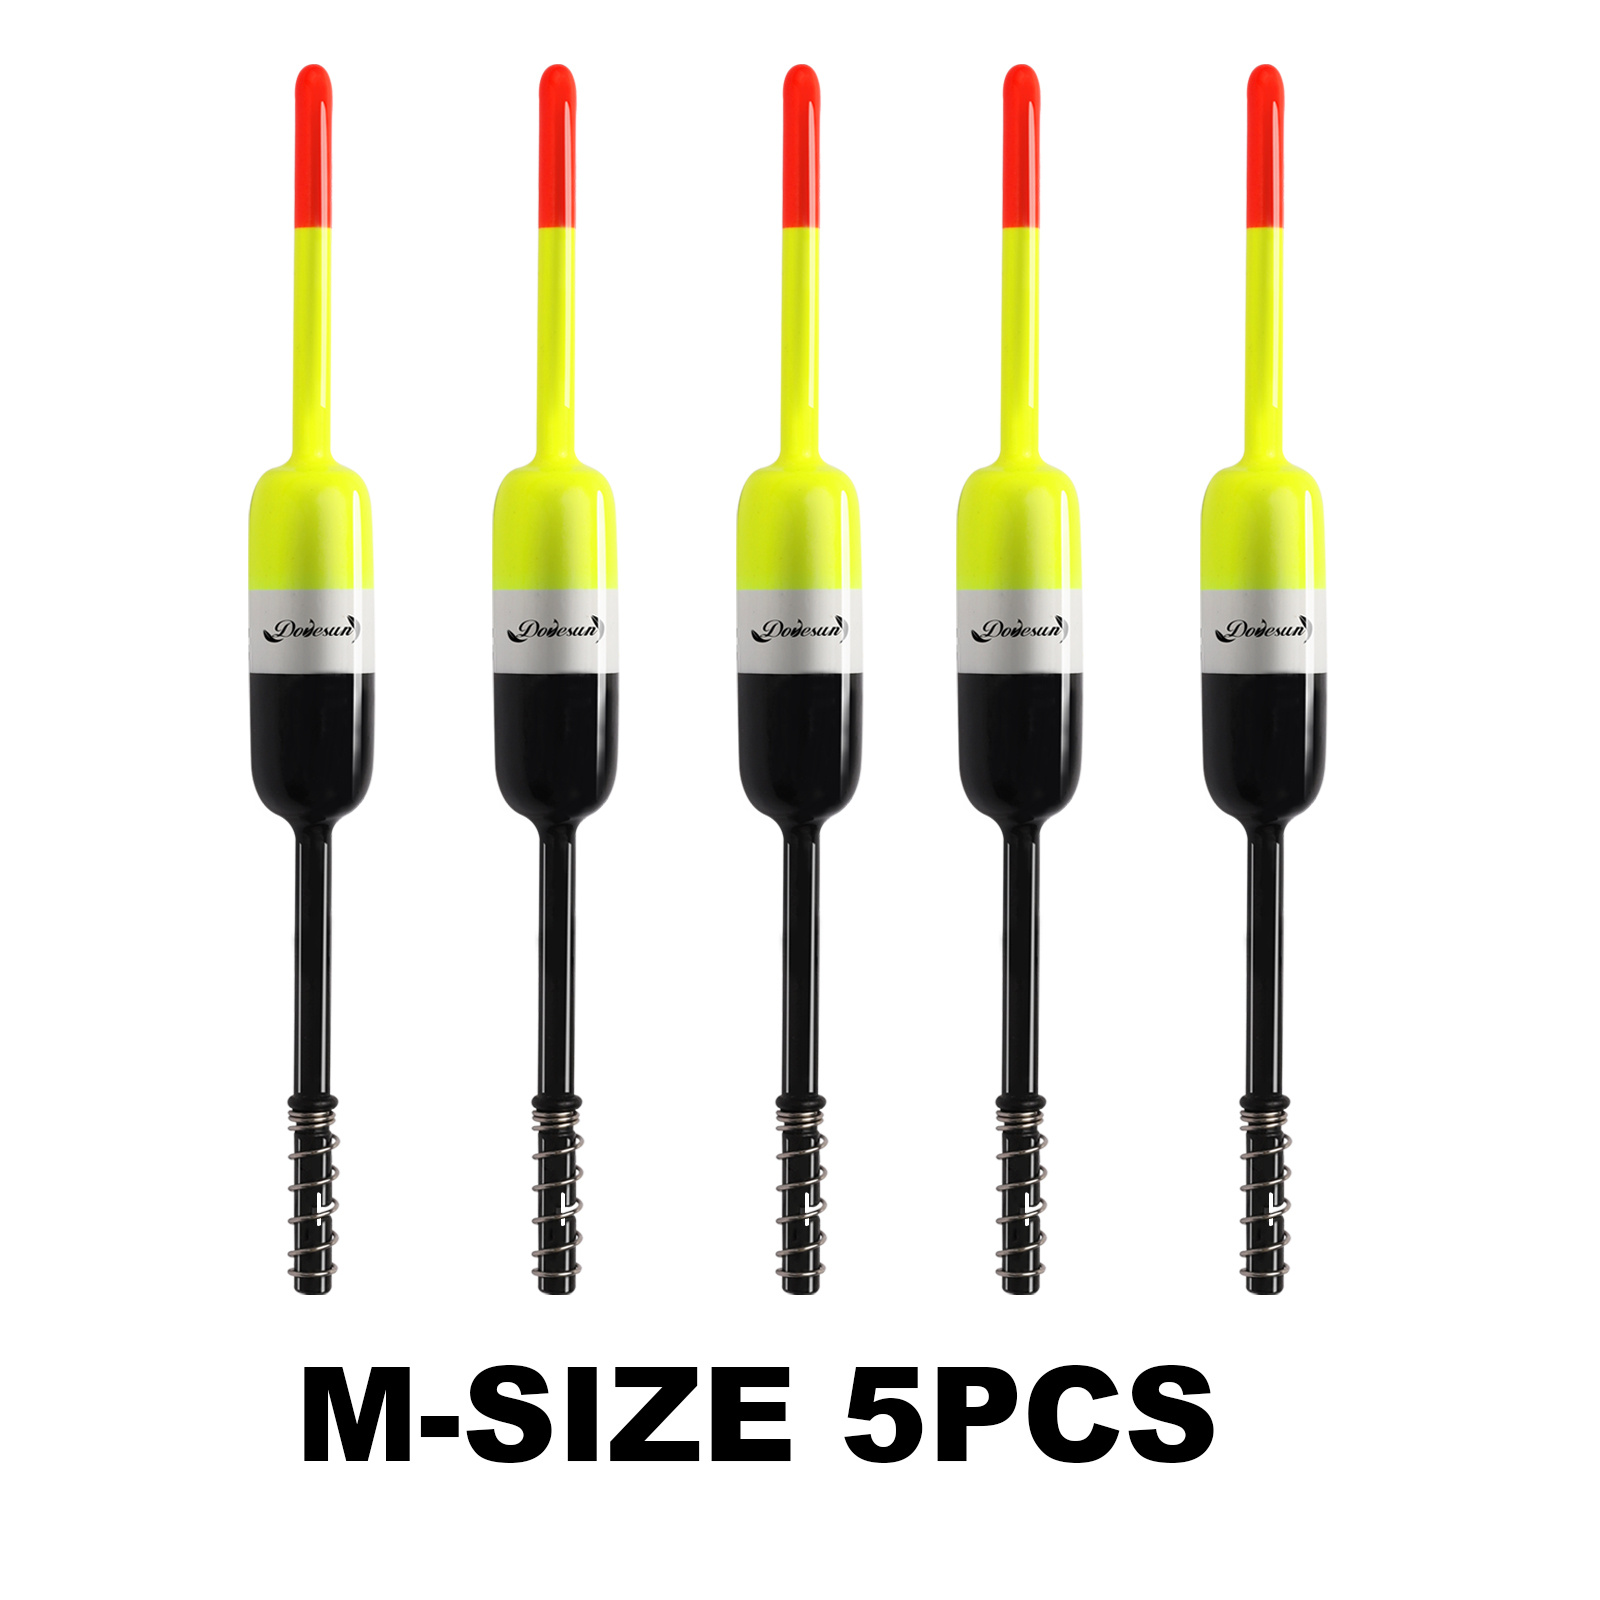 5pcs Premium Fishing Bobbers - Slip Bobbers for Crappie and Panfish - Easy  to Use Fishing Floats and Bobbers - Essential Fishing Accessories